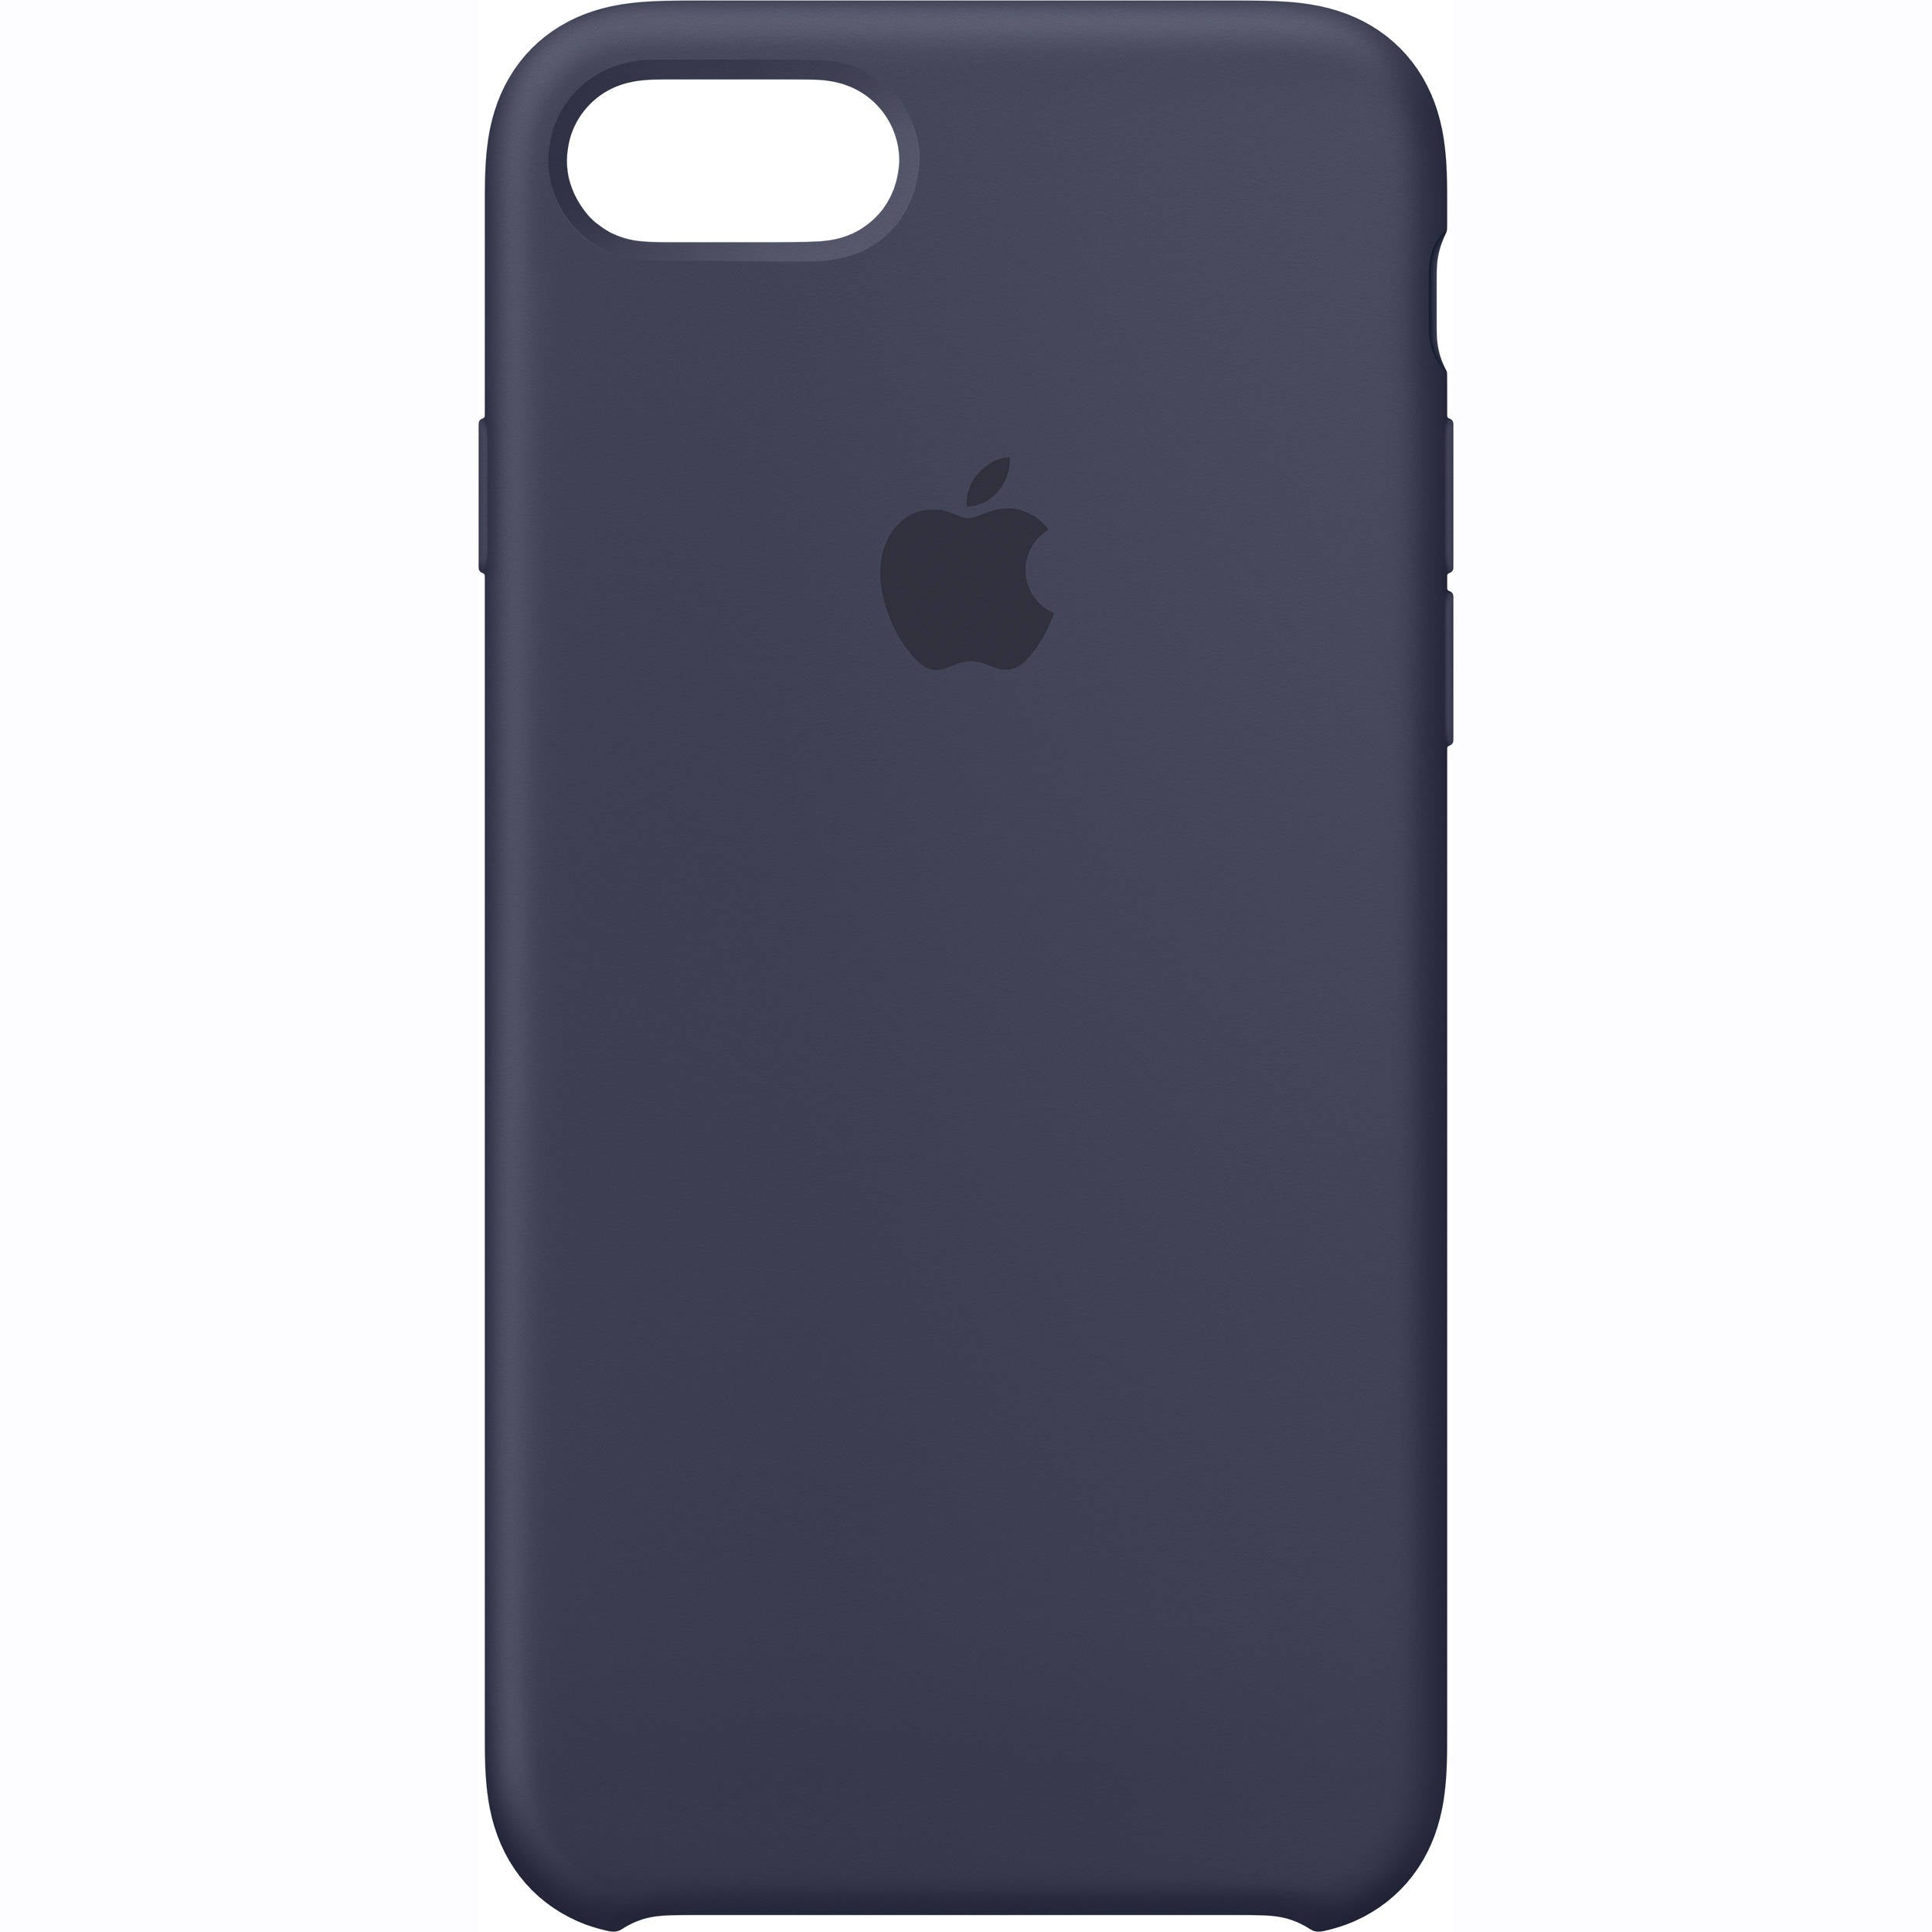 Apple iPhone 7 / 8 Silicone Case with Wireless Charging Support